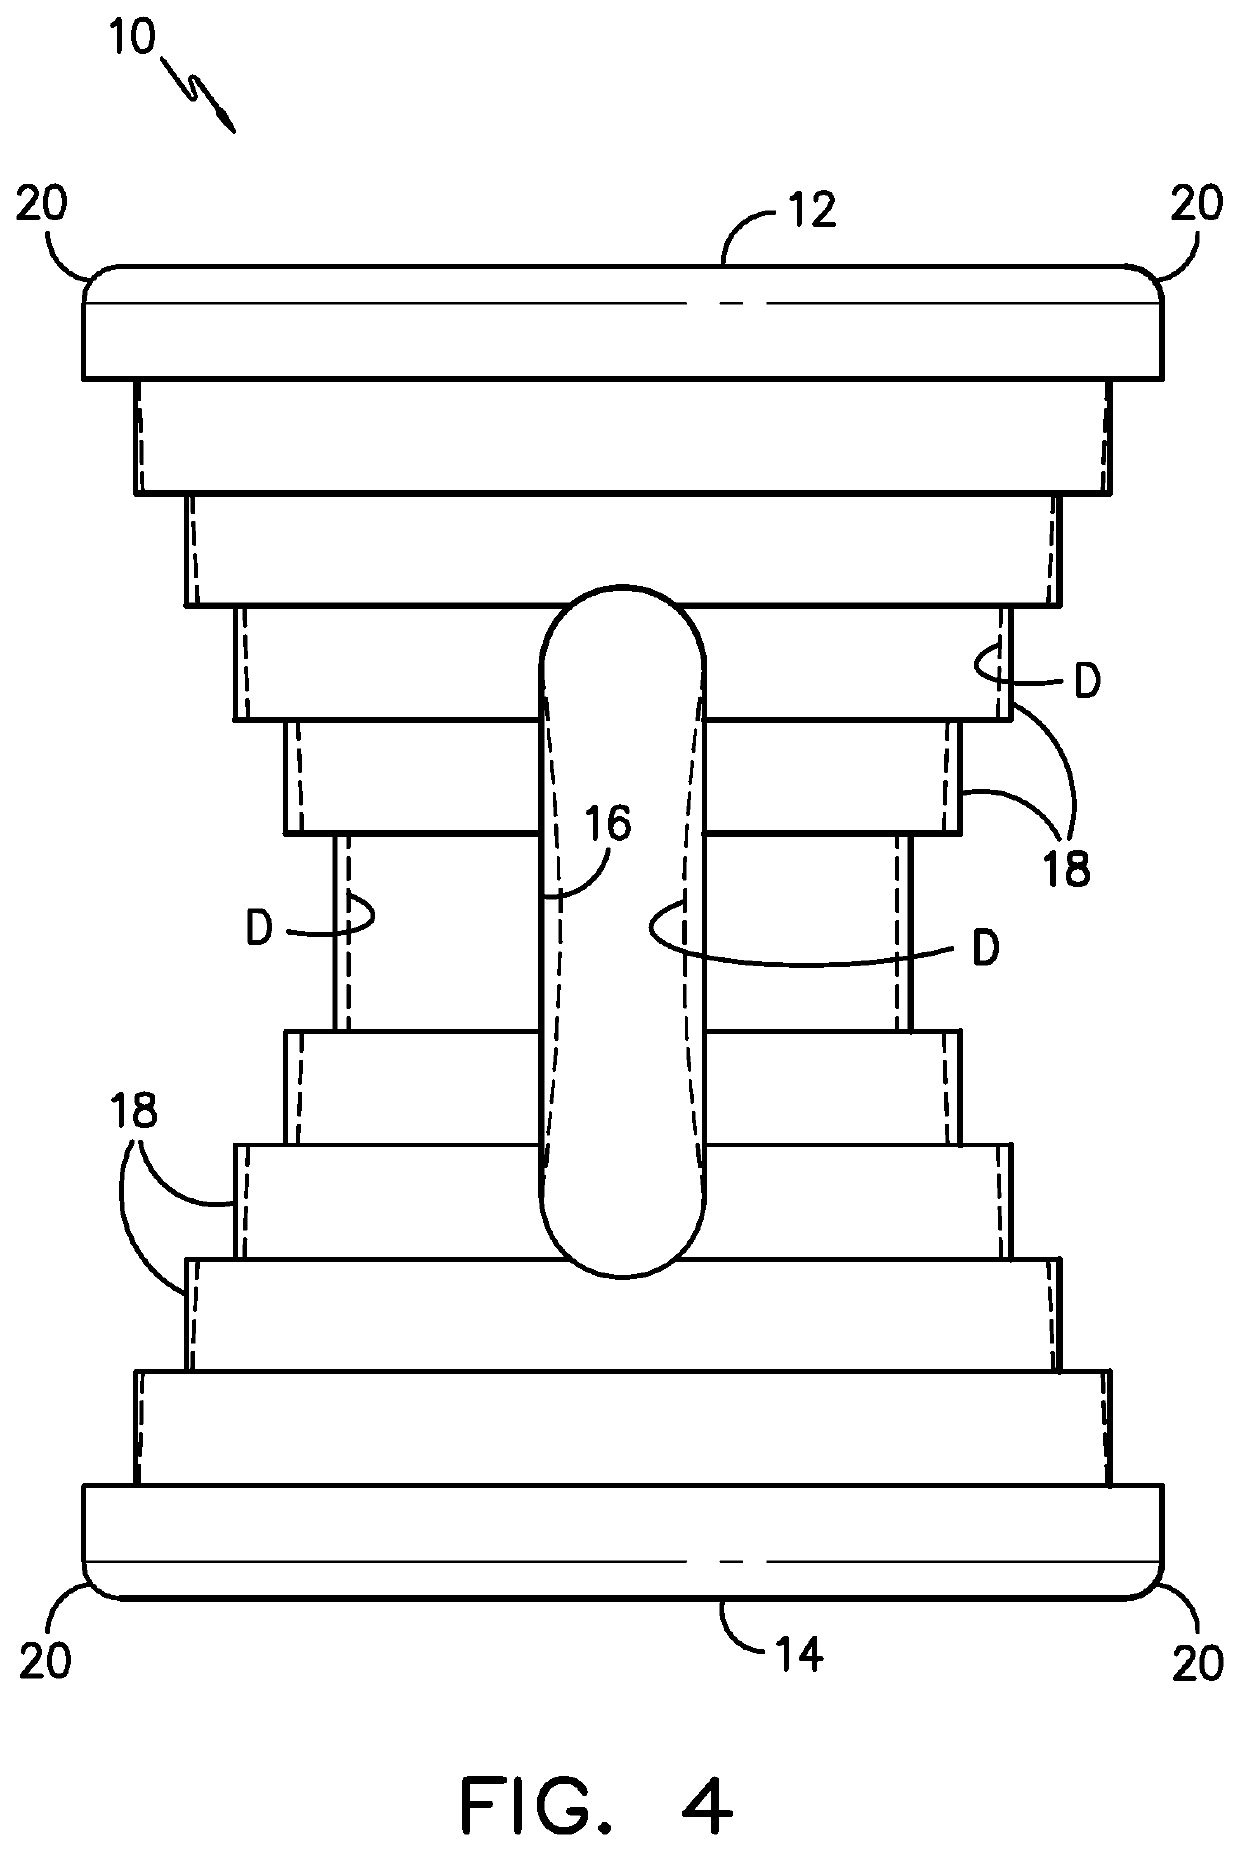 Miter joint connectors for frame assembly and method of connecting mitered frame members